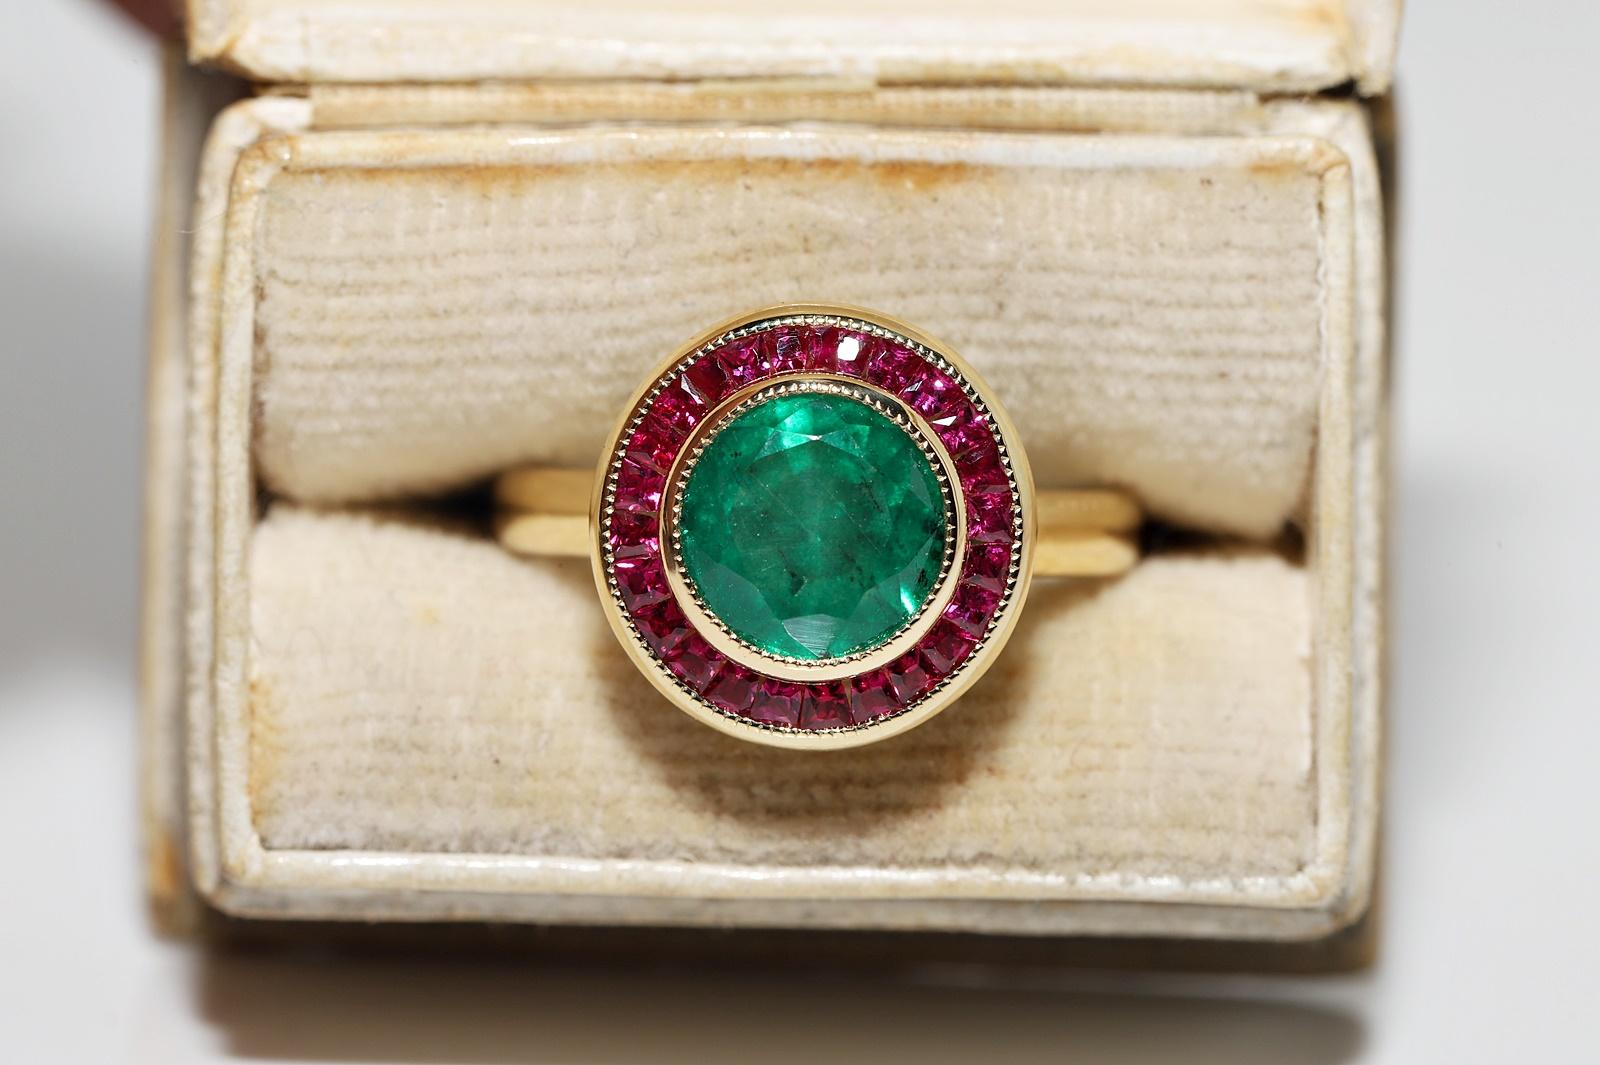 In very good condition.
Total weight is 5.8 grams.
Totally is emerald 0.85 ct.
Totally is ruby 0.85 ct.
Ring size is US 6.5 
We can make any size.
Please contact for any questions.